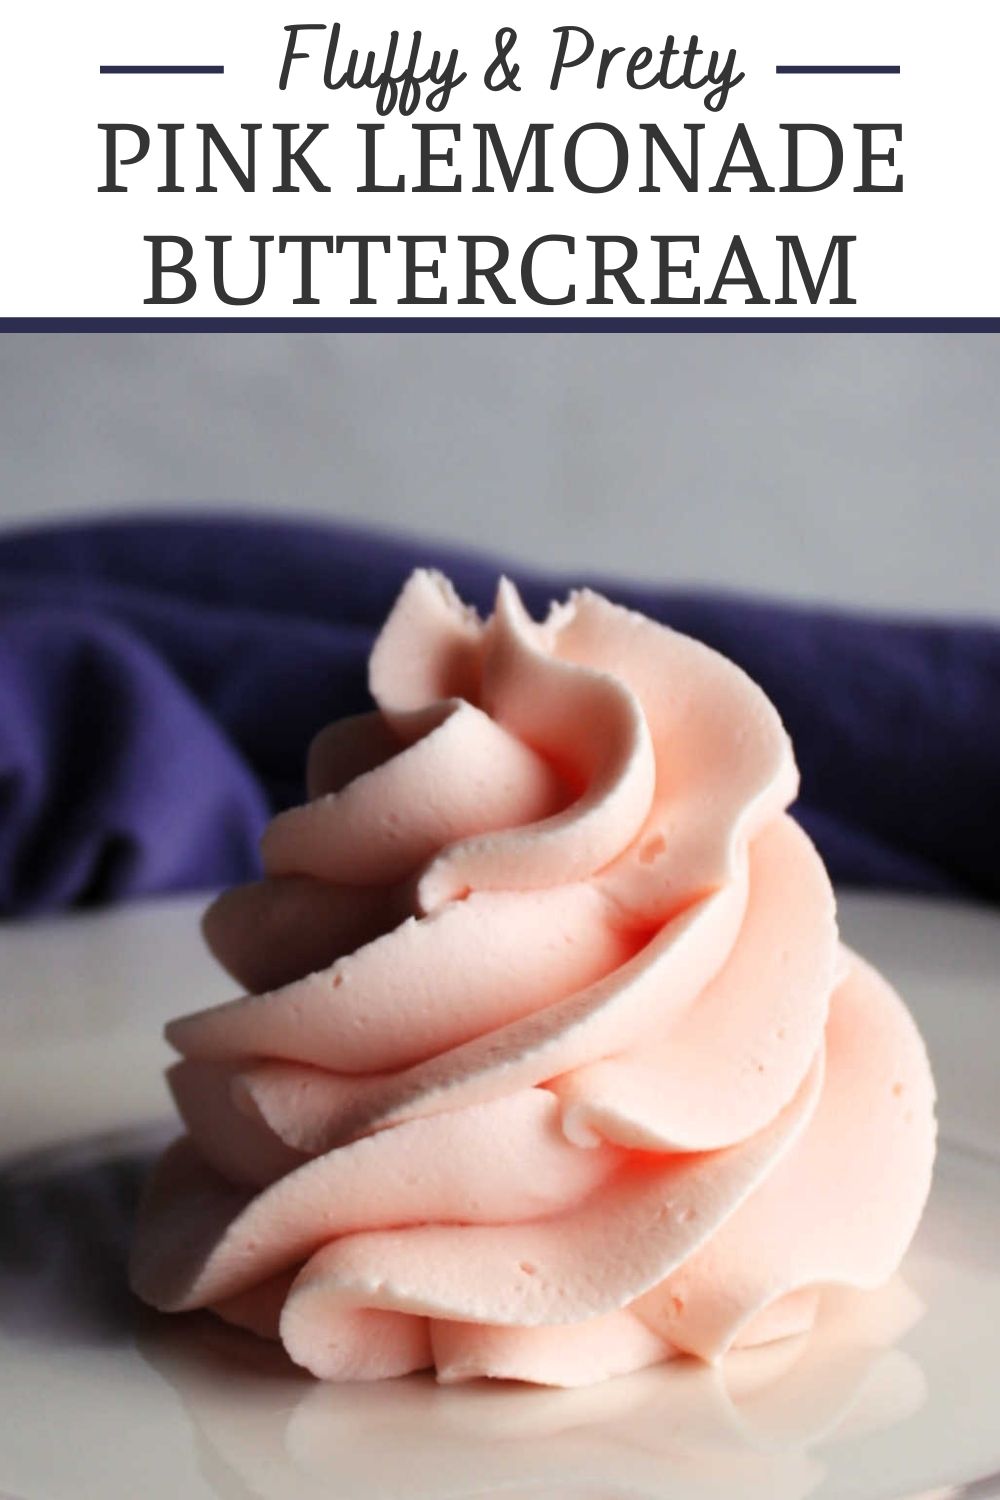 Pink lemonade buttercream is pretty with its light pink hue and tangy lemon flavor. This frosting is quick to make, fun to use and super versatile.